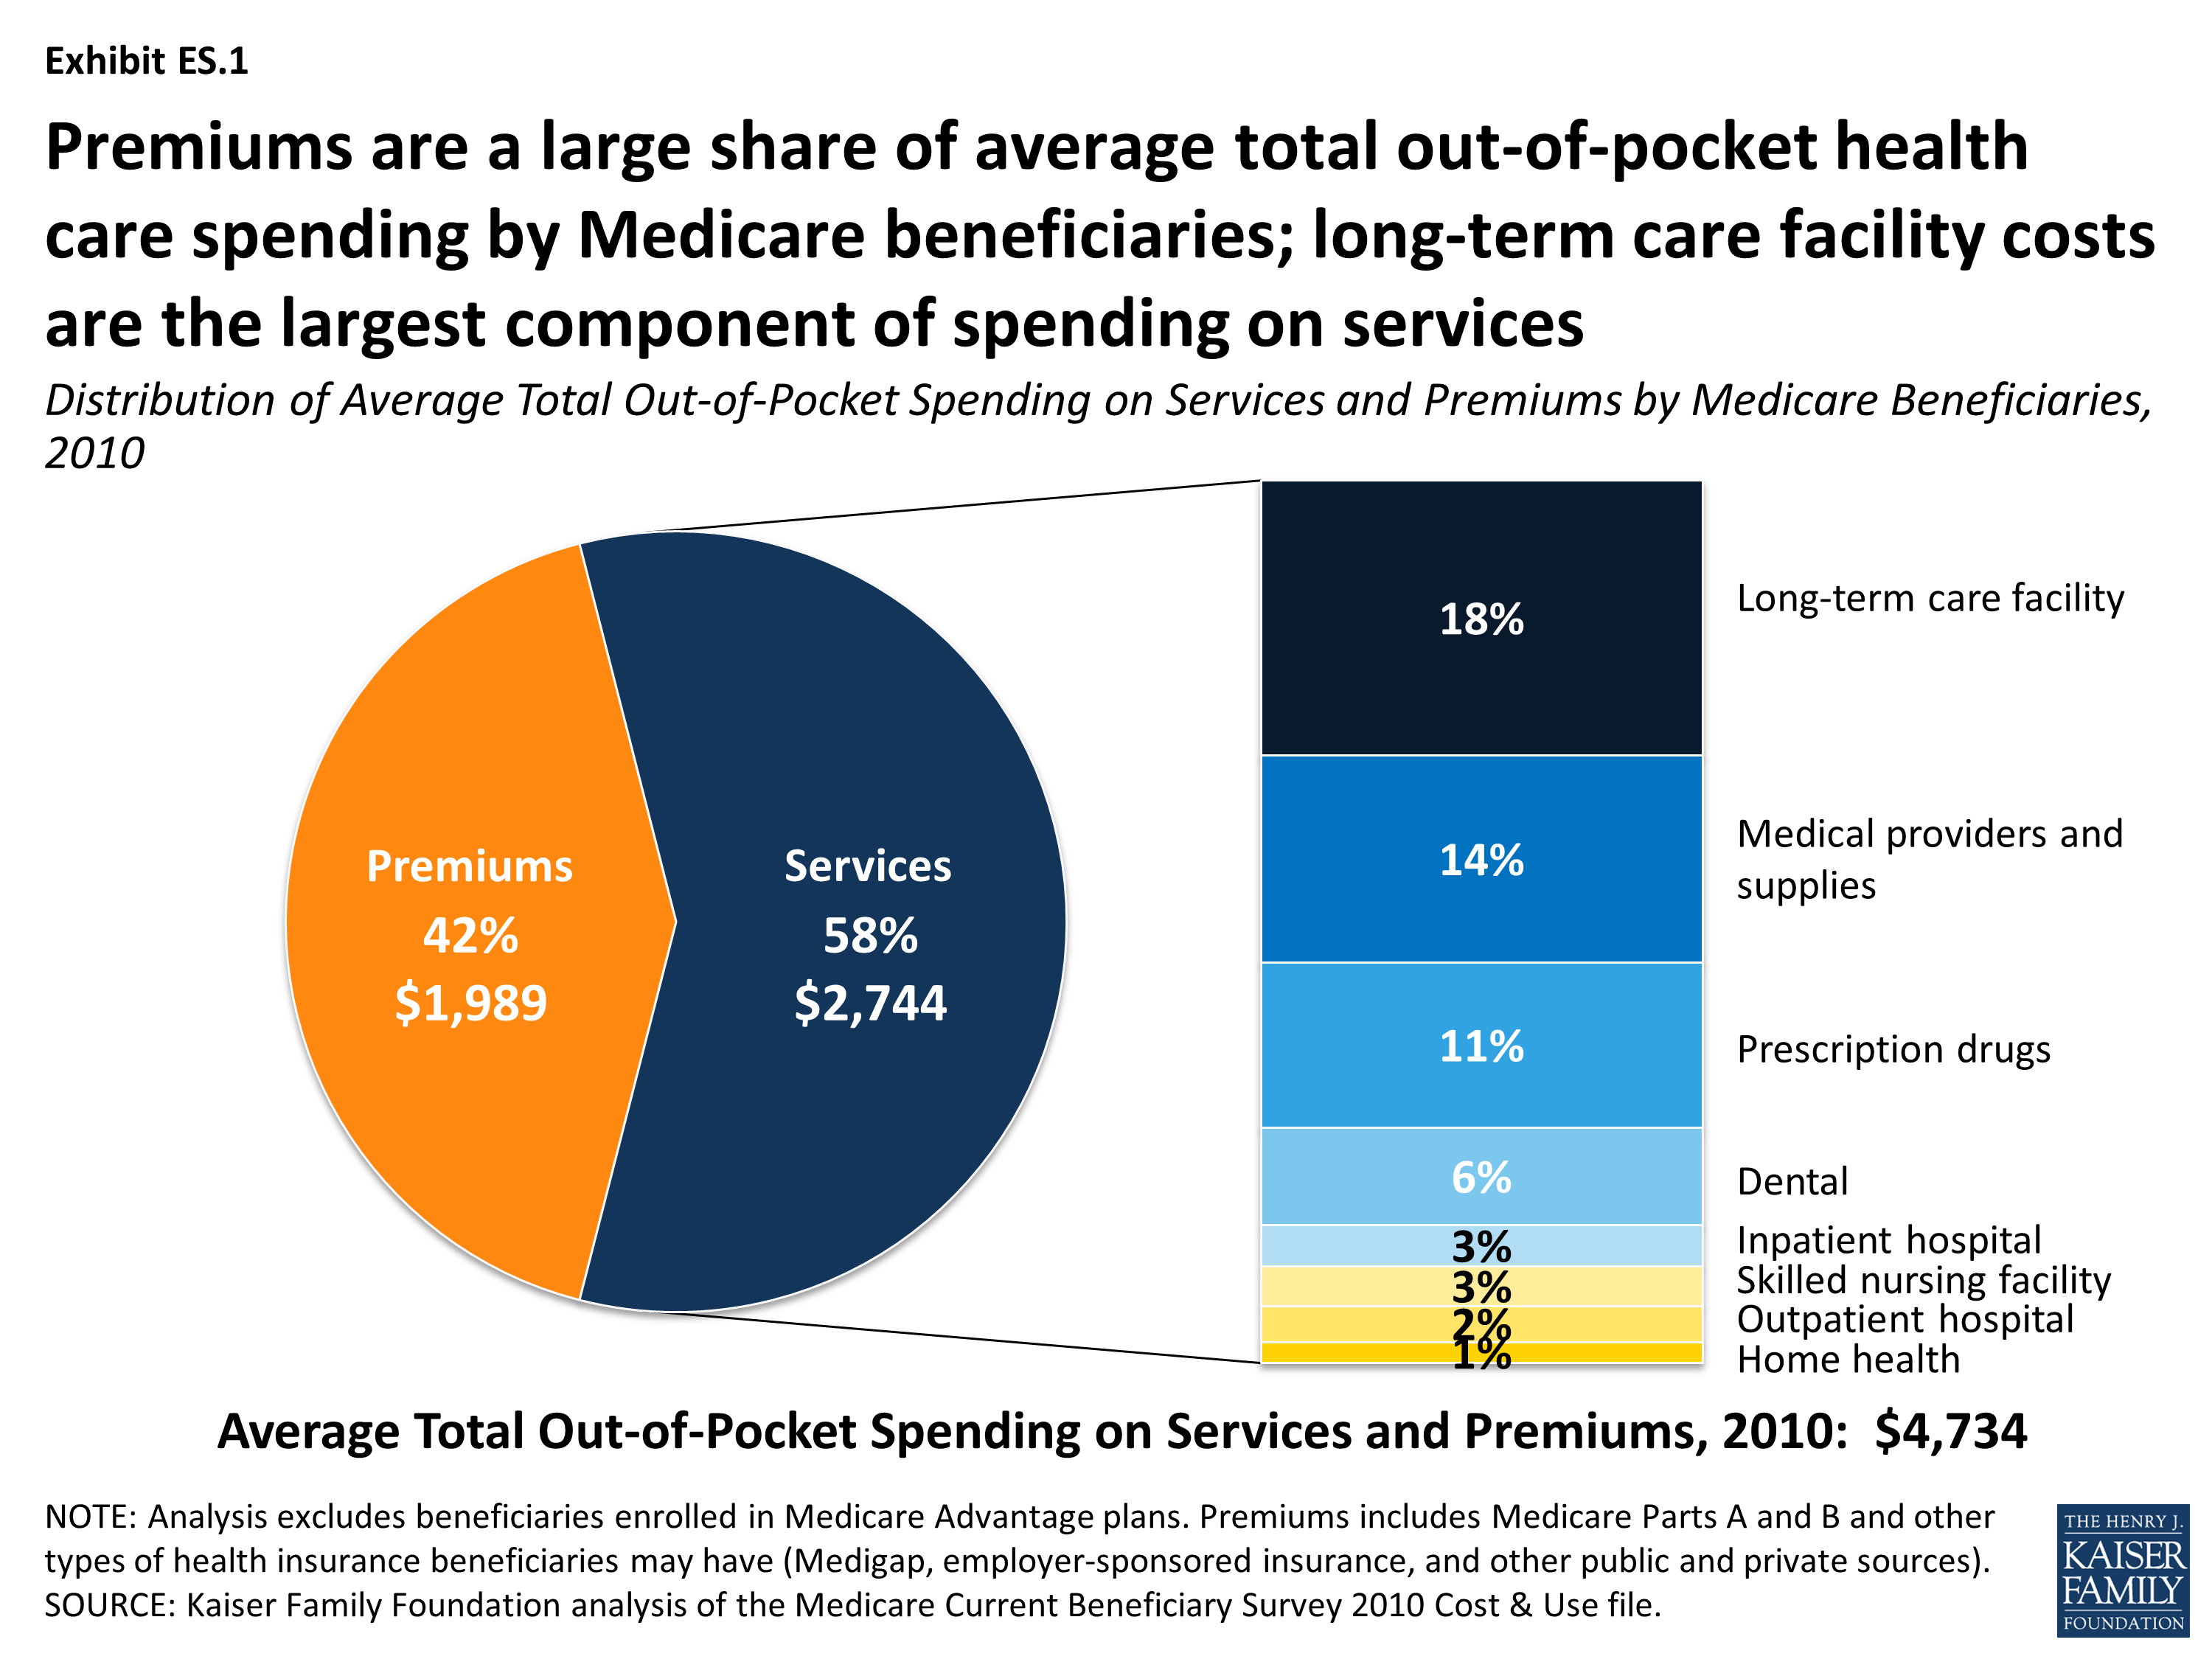 how-much-is-enough-out-of-pocket-spending-among-medicare-beneficiaries